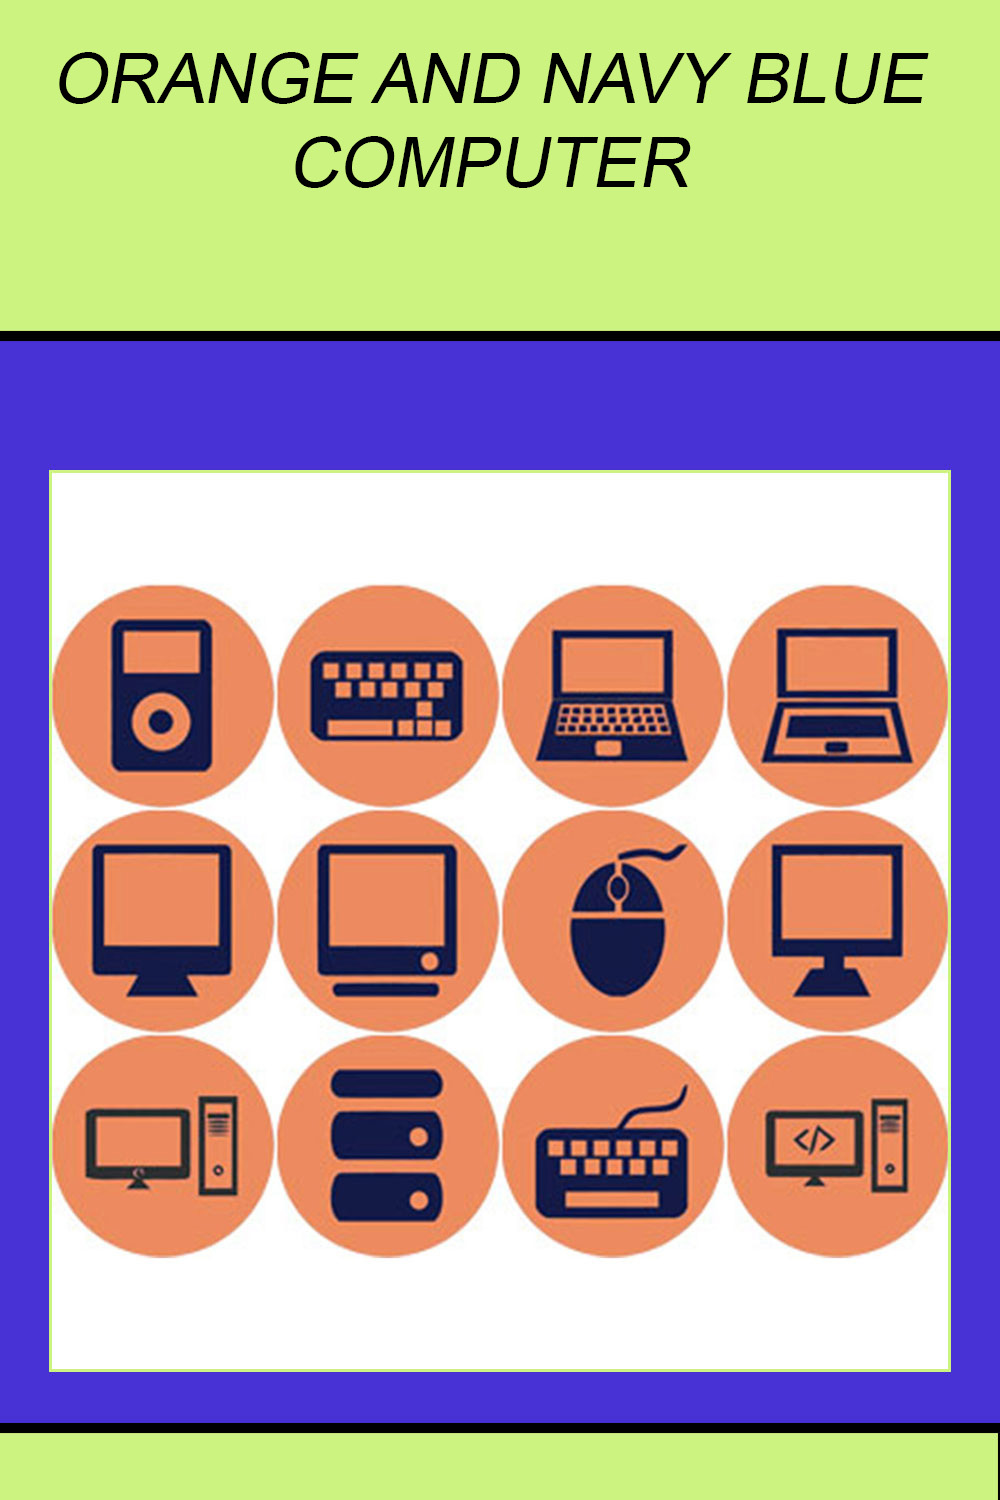 ORANGE AND NAVY BLUE COMPUTER ROUND ICONS pinterest preview image.